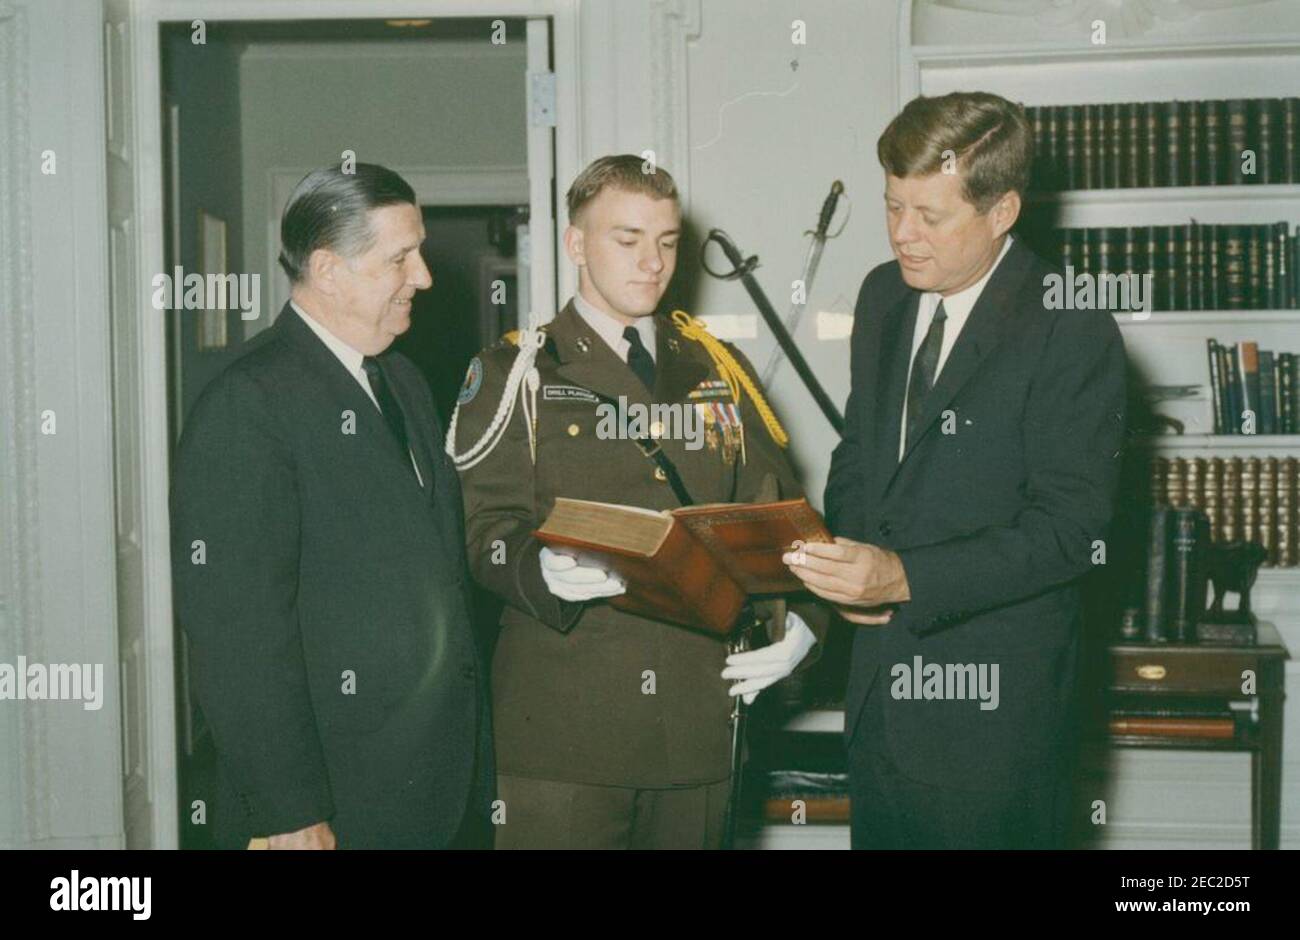 Visit of Lt. Col. Terry Entner, a Calumet (Illinois) High School Reserve Officersu2019 Training Corps (ROTC) Cadet and Congressman William T. Murphy (Illinois), 10:19AM. President John F. Kennedy receives a leather-bound collection of the works of William Shakespeare from Lieutenant Colonel Terry Entner (center), a cadet in the Reserve Officersu2019 Training Corps (ROTC) at Calumet High School in Chicago, Illinois; Representative William T. Murphy (Illinois) stands at left. Oval Office, White House, Washington, D.C. Stock Photo